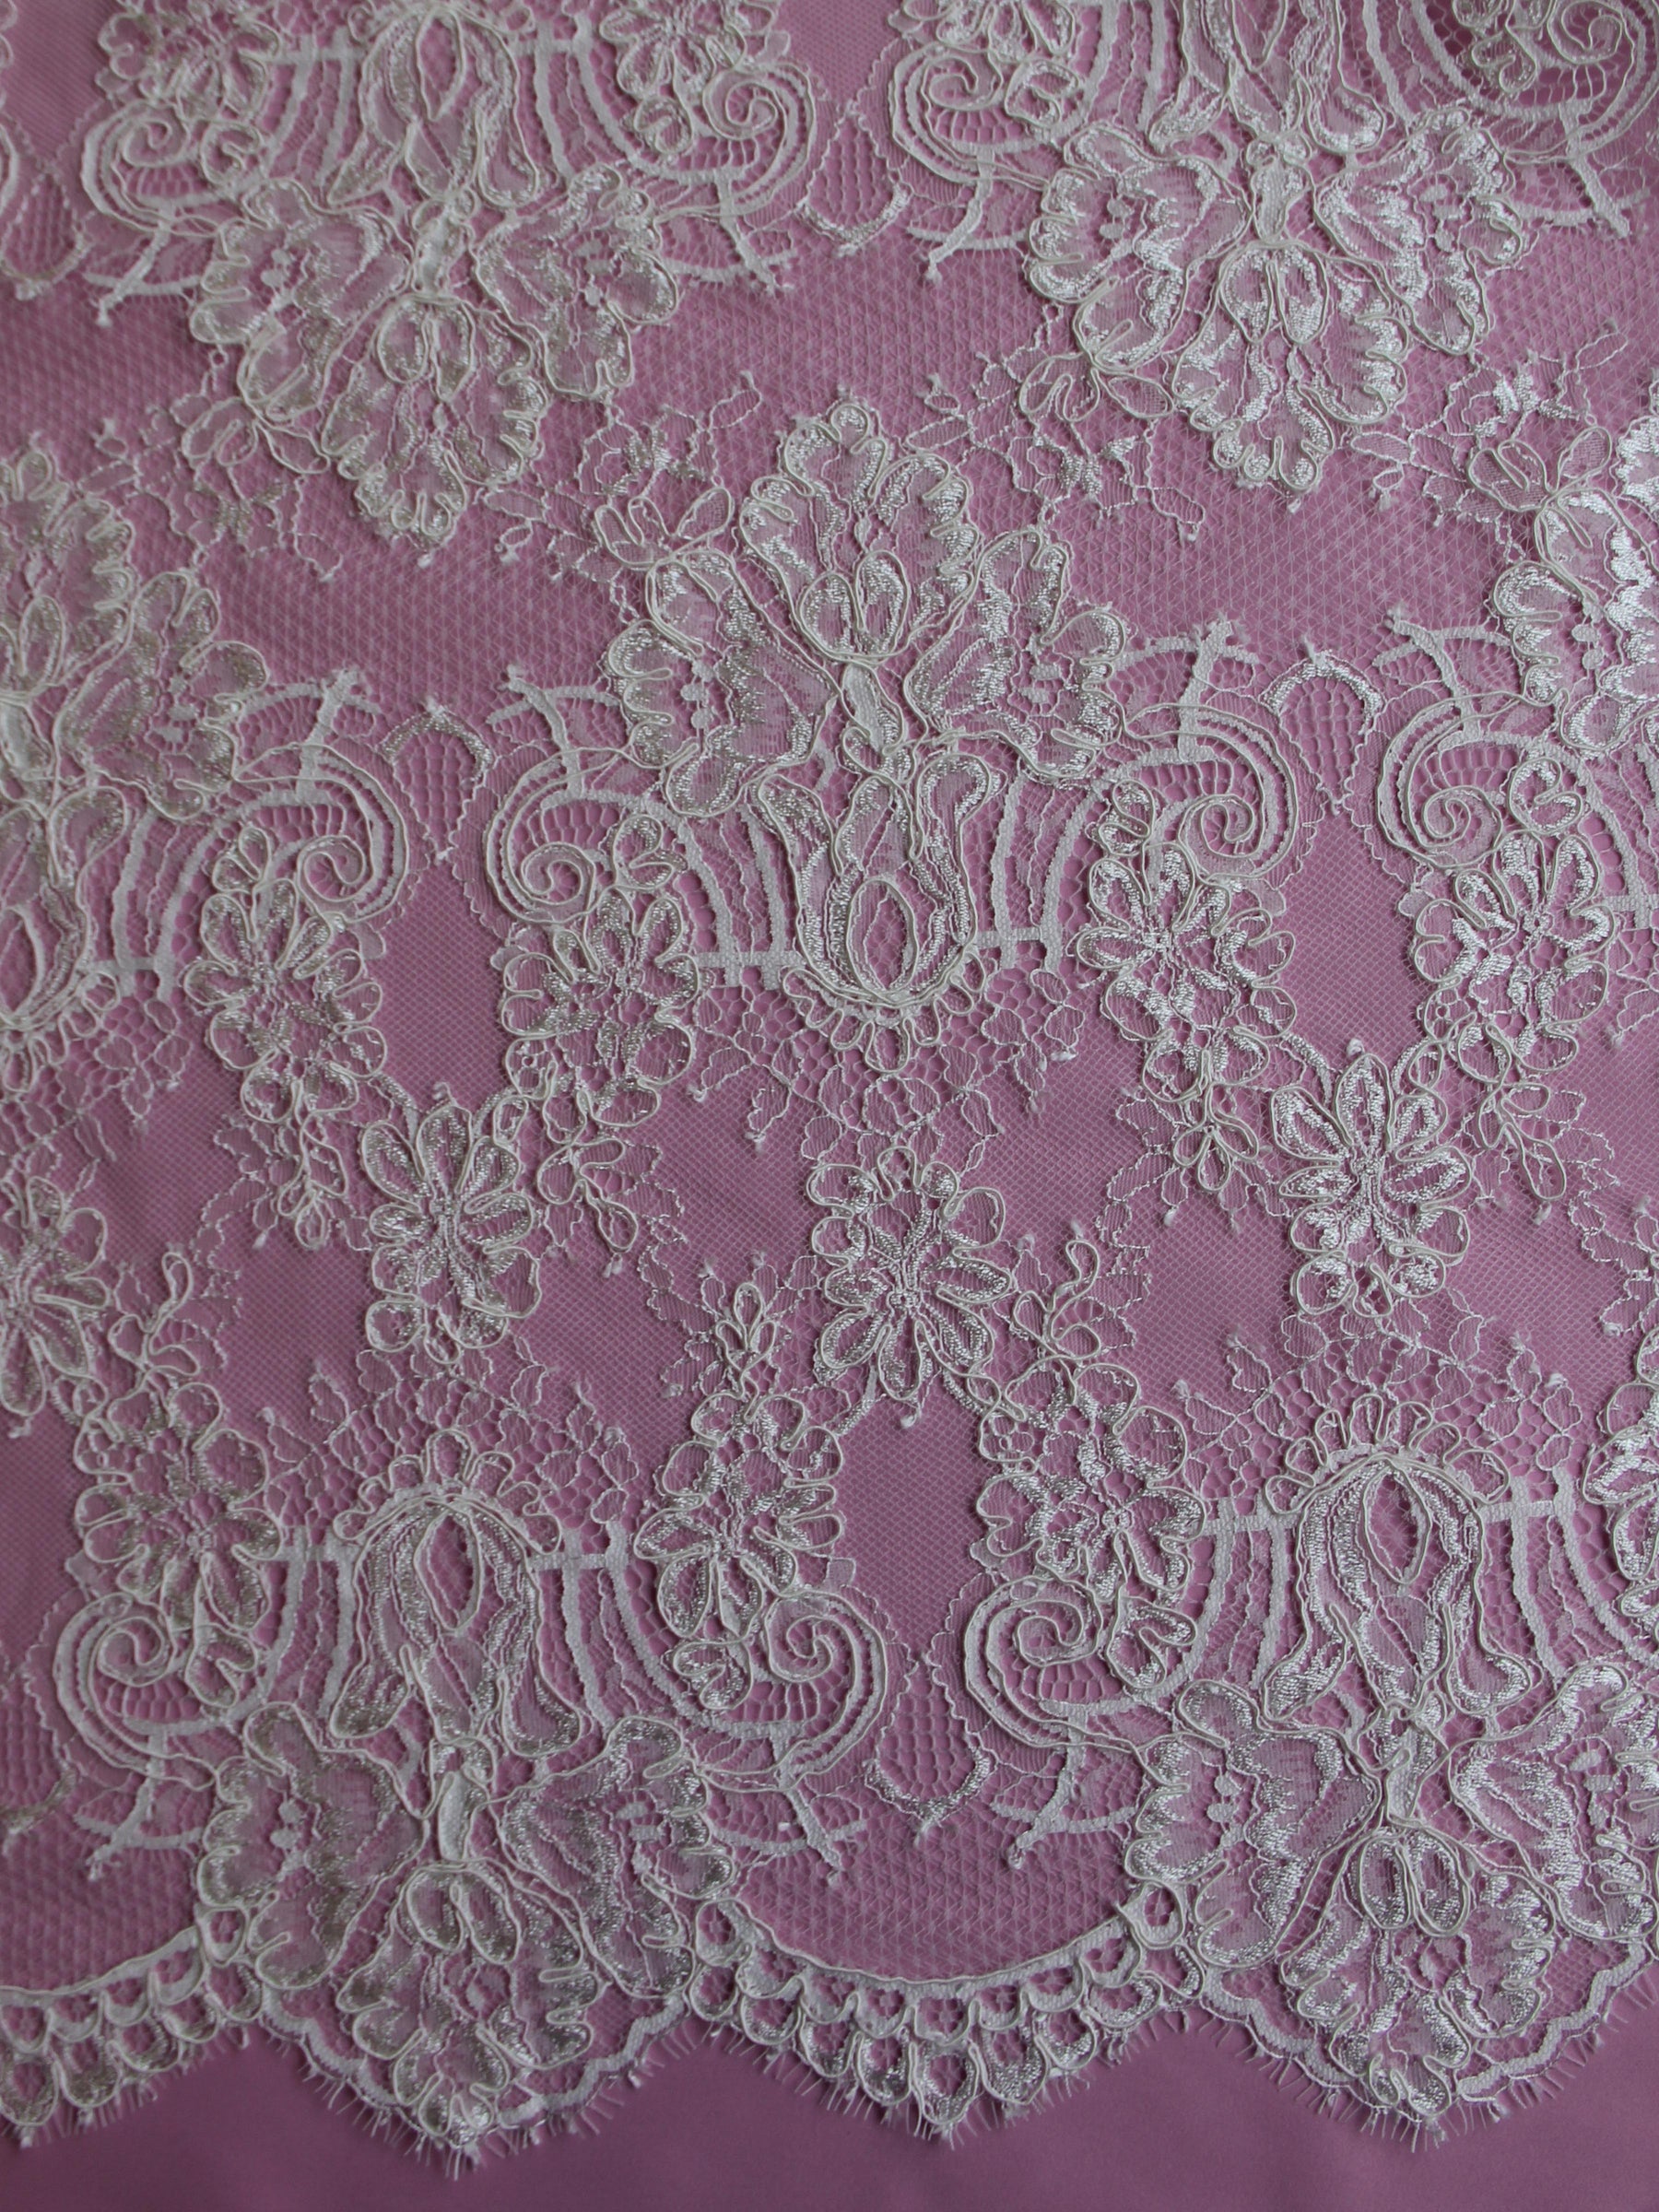 Discounted Ivory Corded Lace - Karen